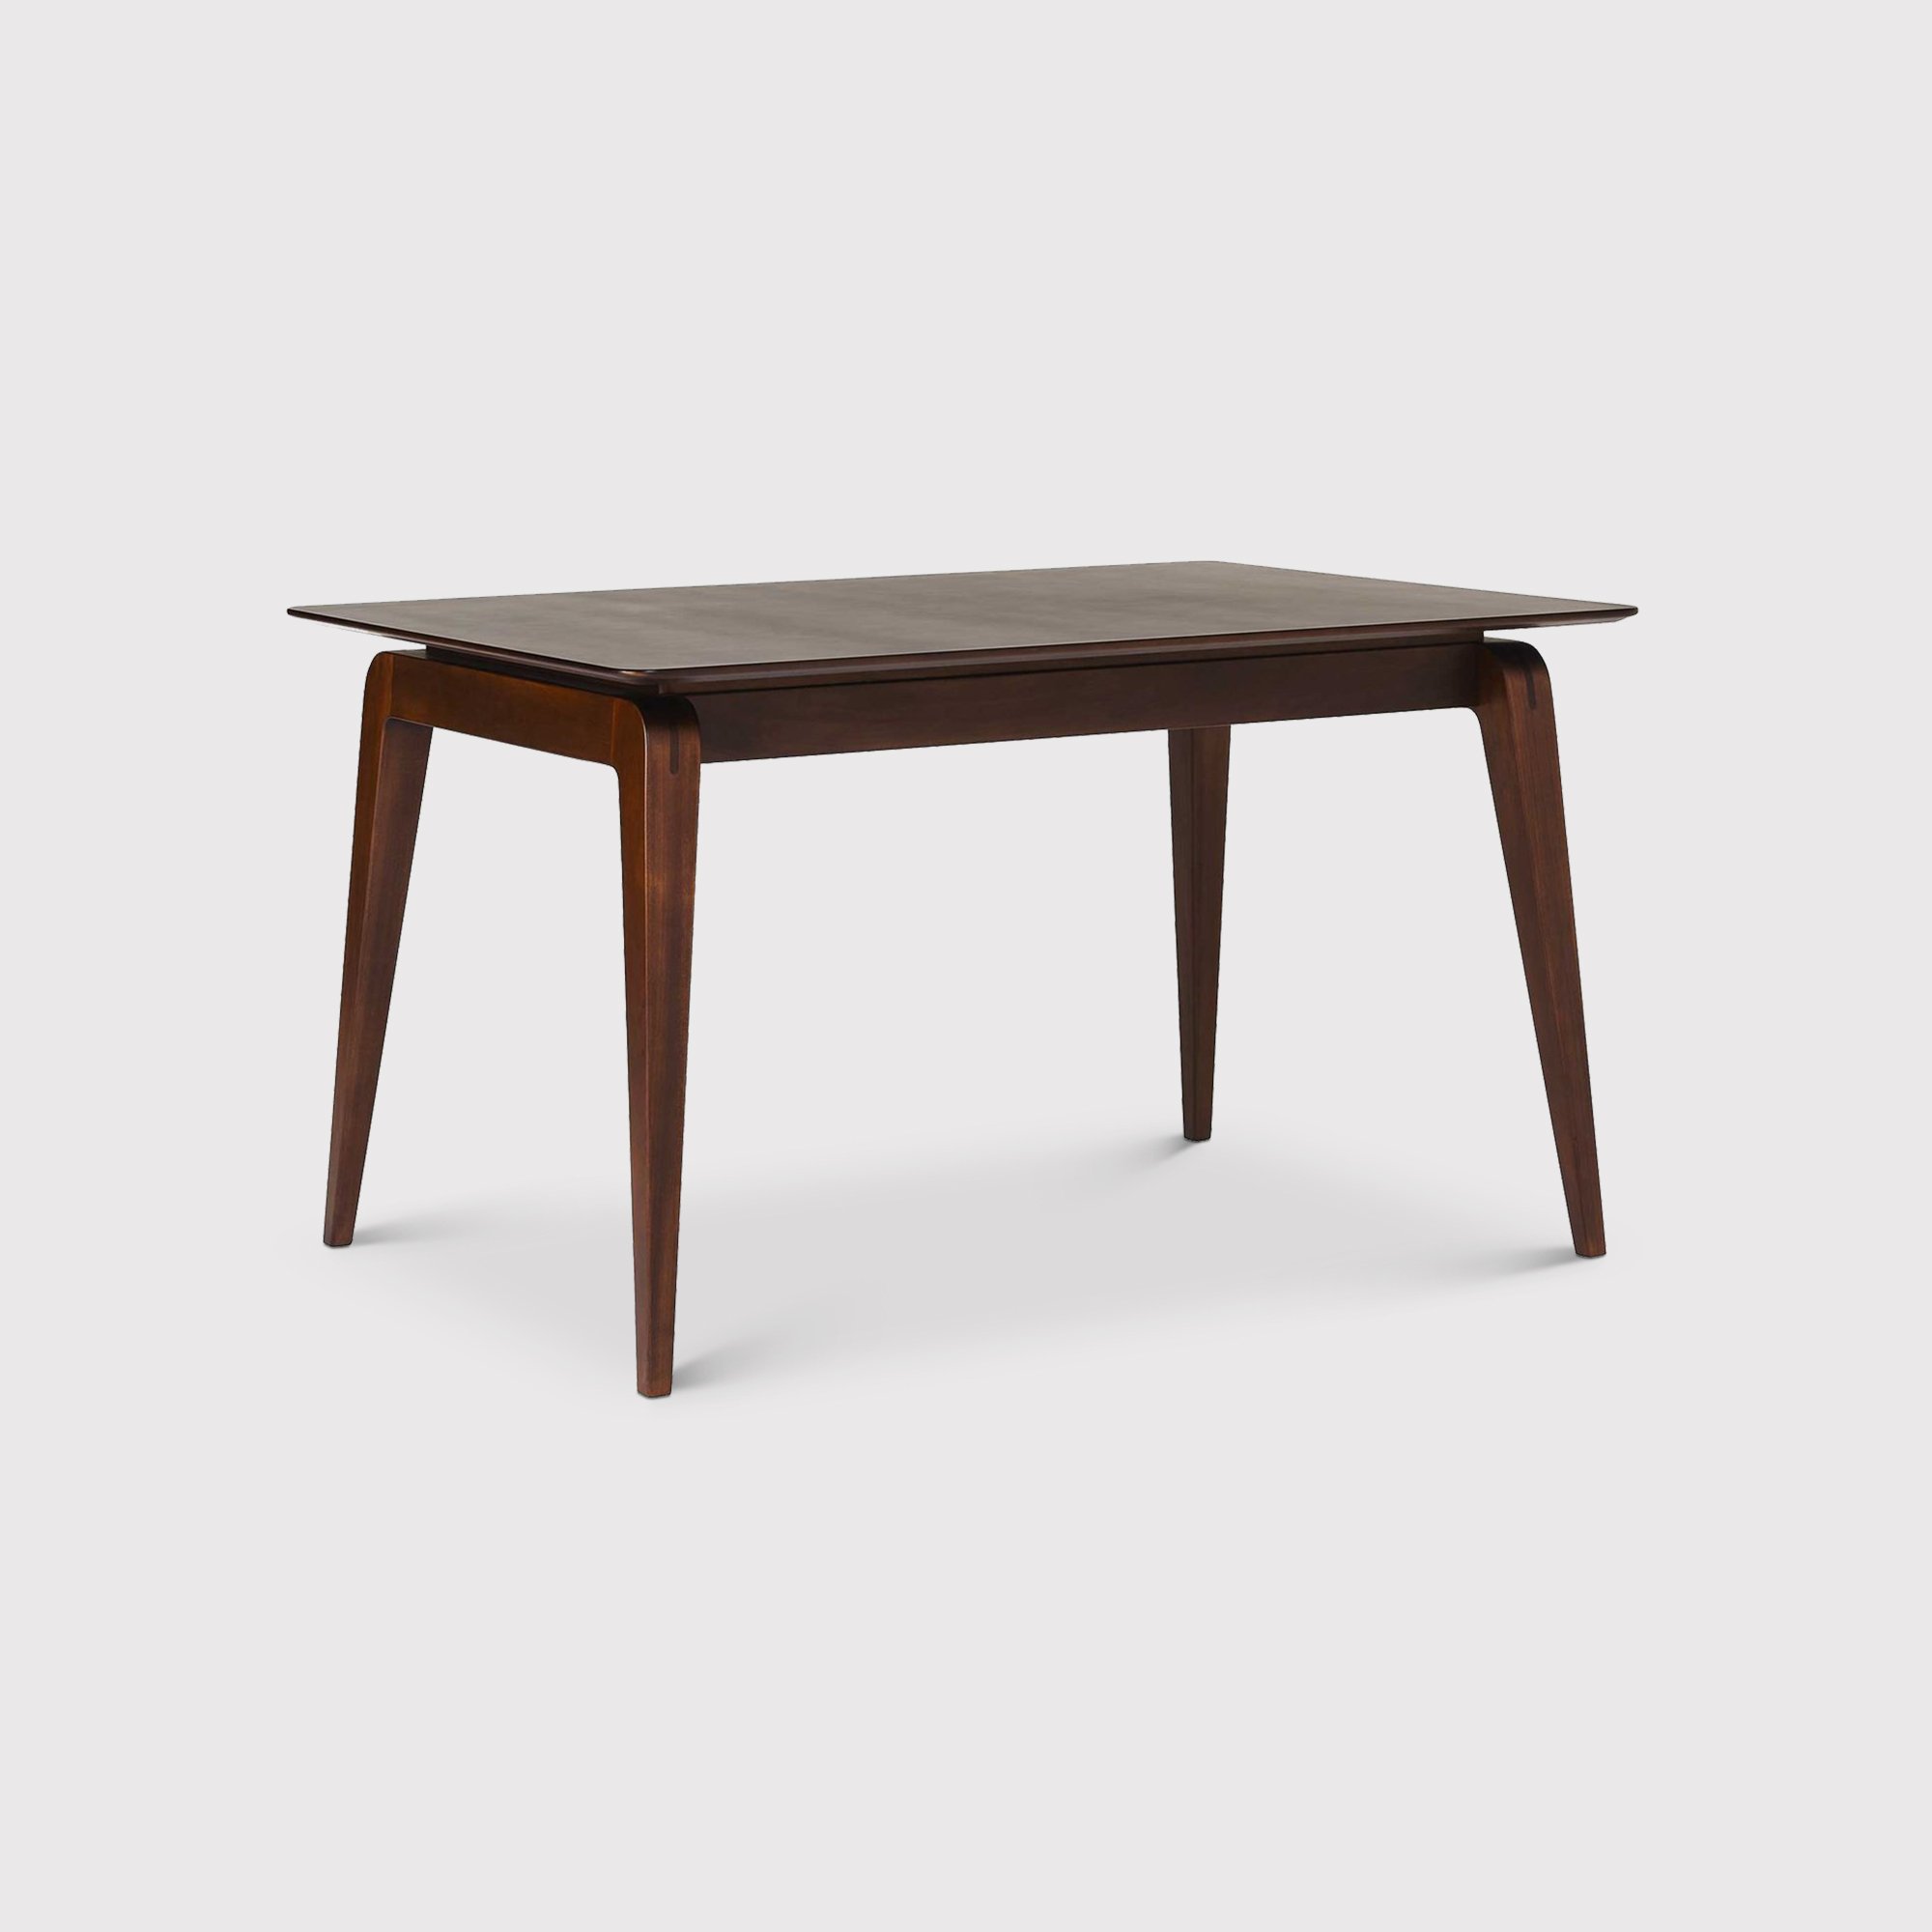 Ercol Lugo Small Dining Table, Brown | Barker & Stonehouse